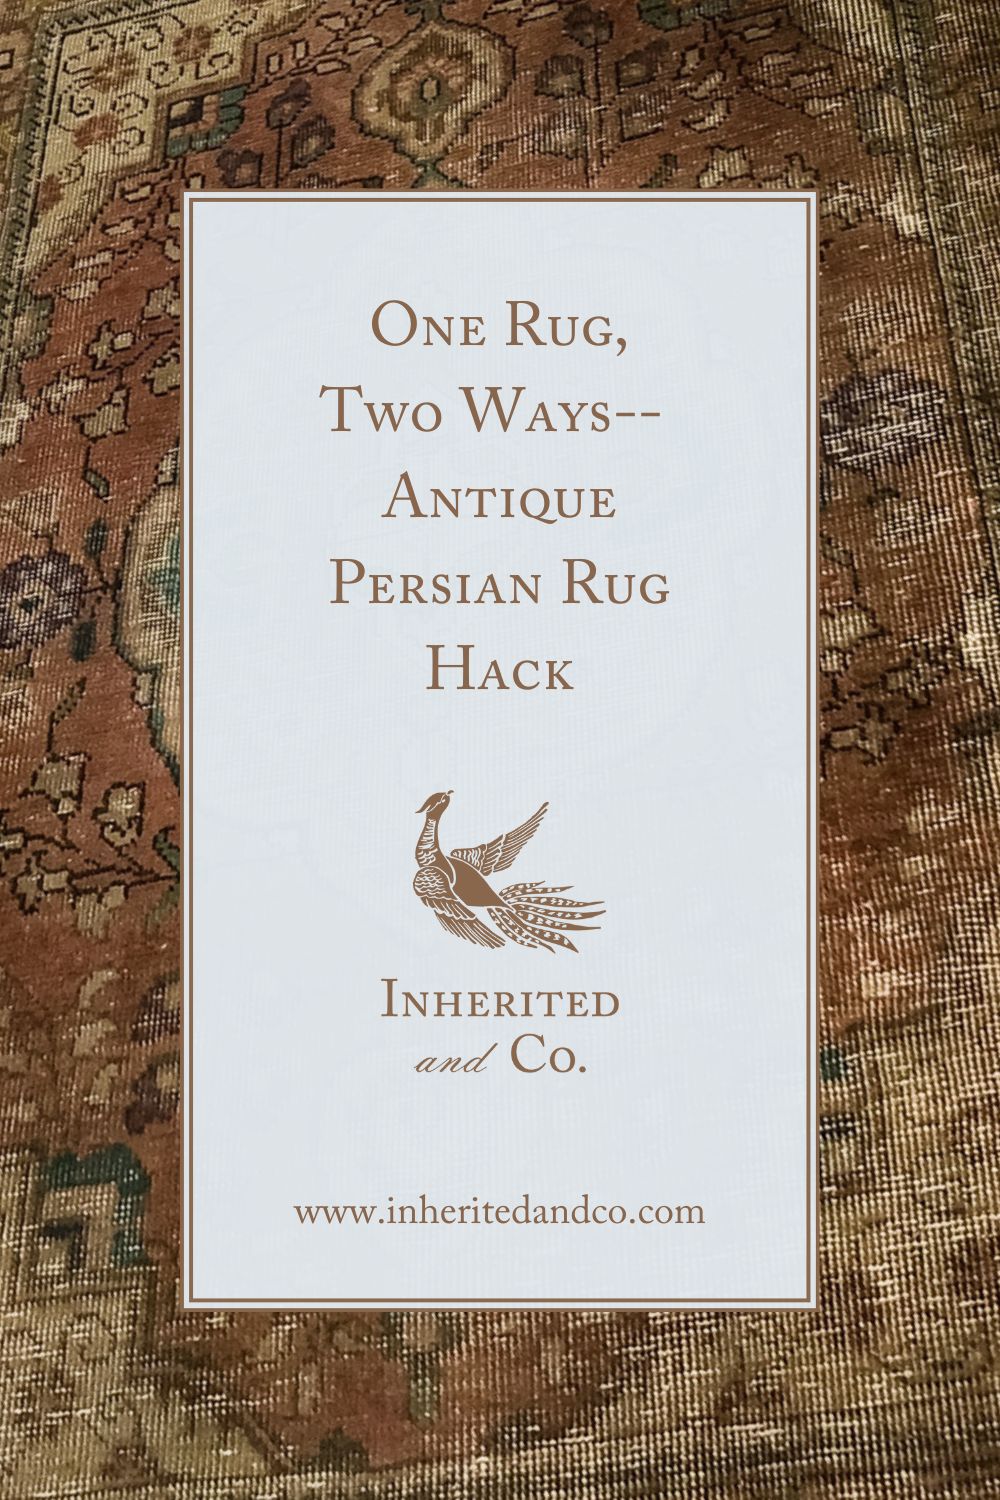 "One Rug, Two Ways--Antique Persian Rug Hack"